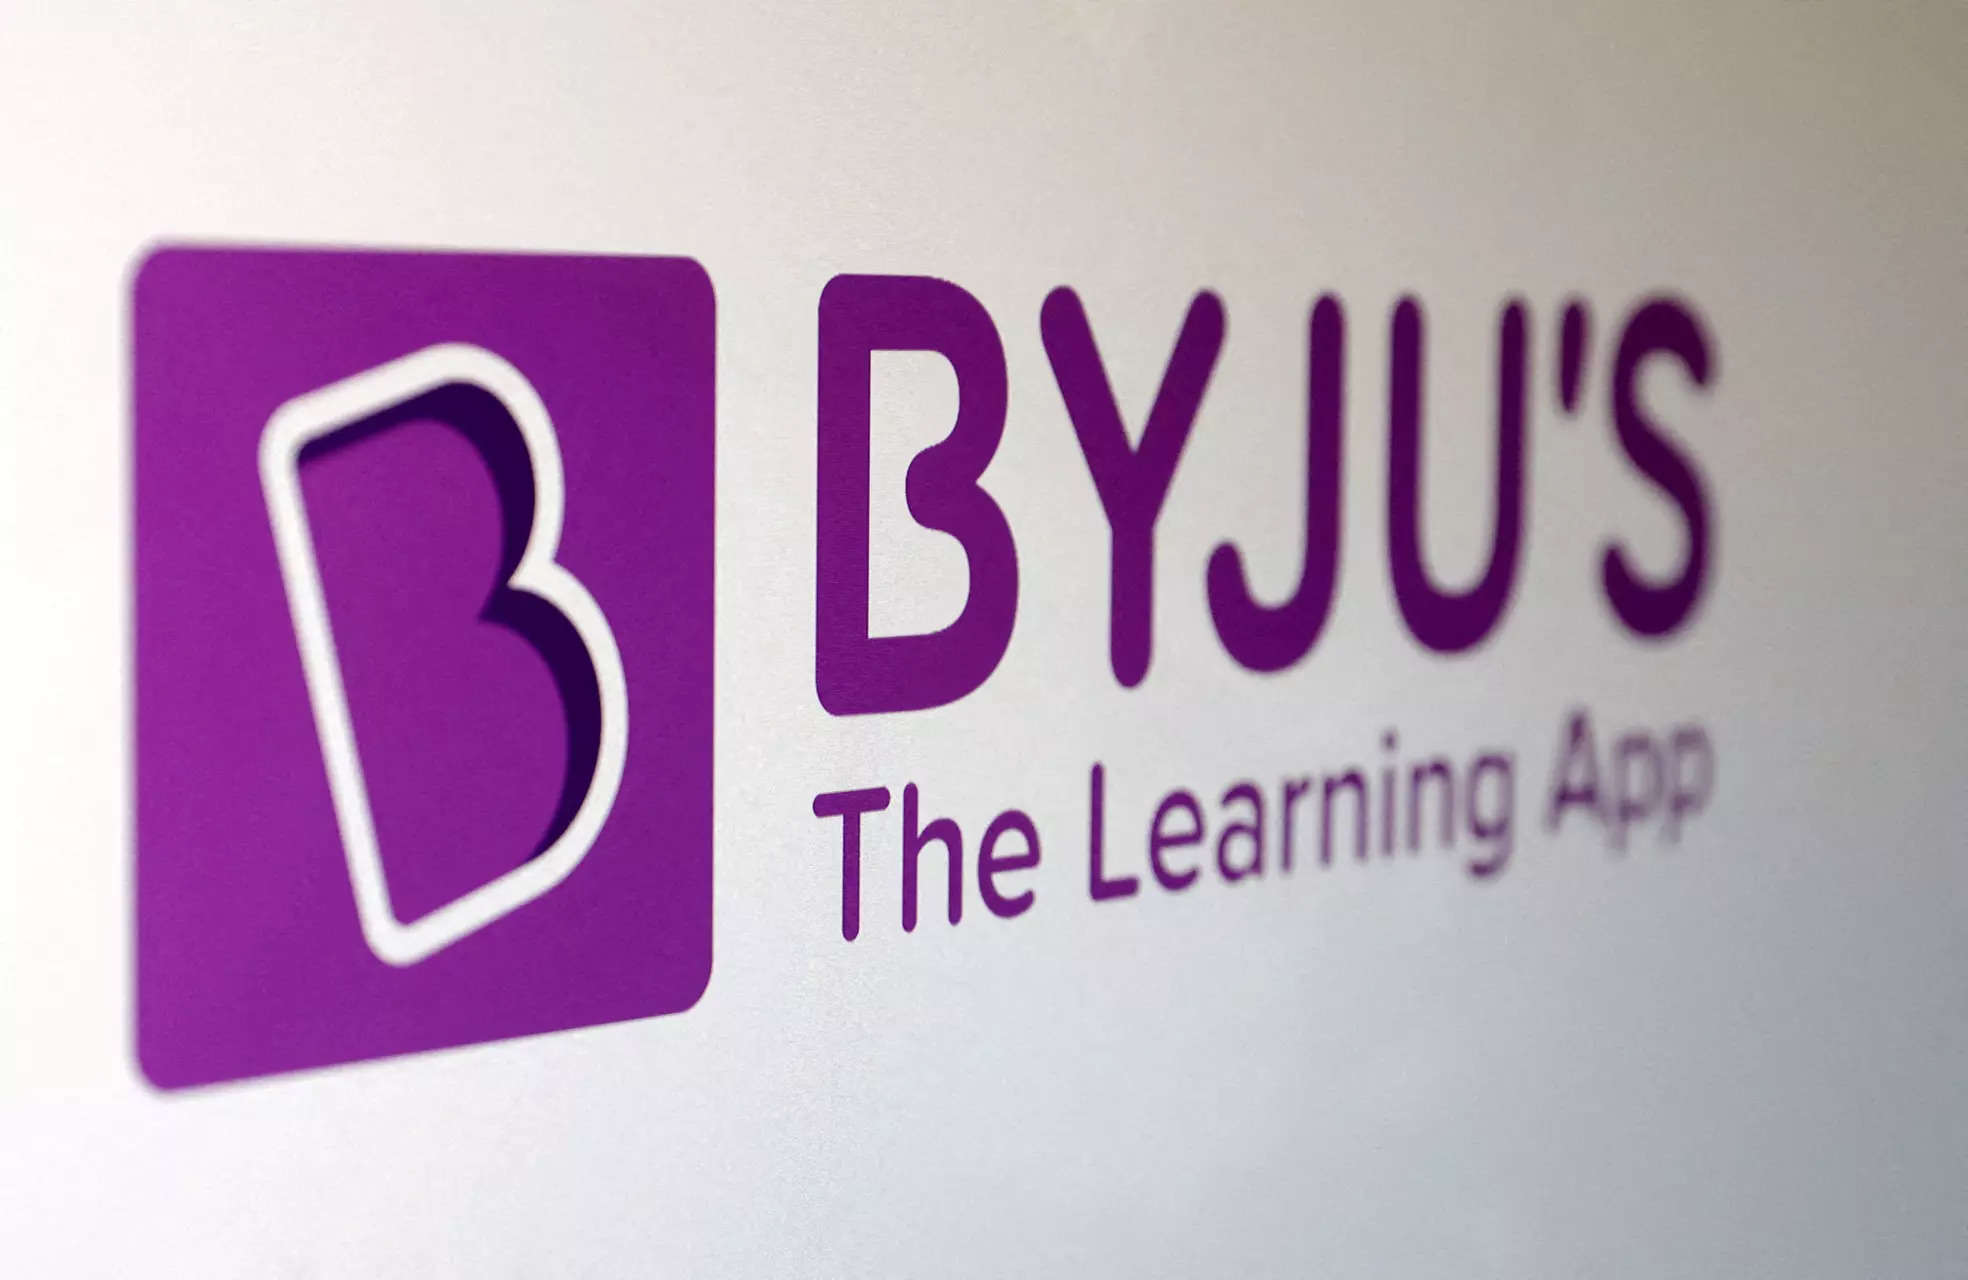 <p>A Byju’s spokesperson confirmed that a PIP was in place last month, but added that the company let go of only 100 employees as a result of that.</p>